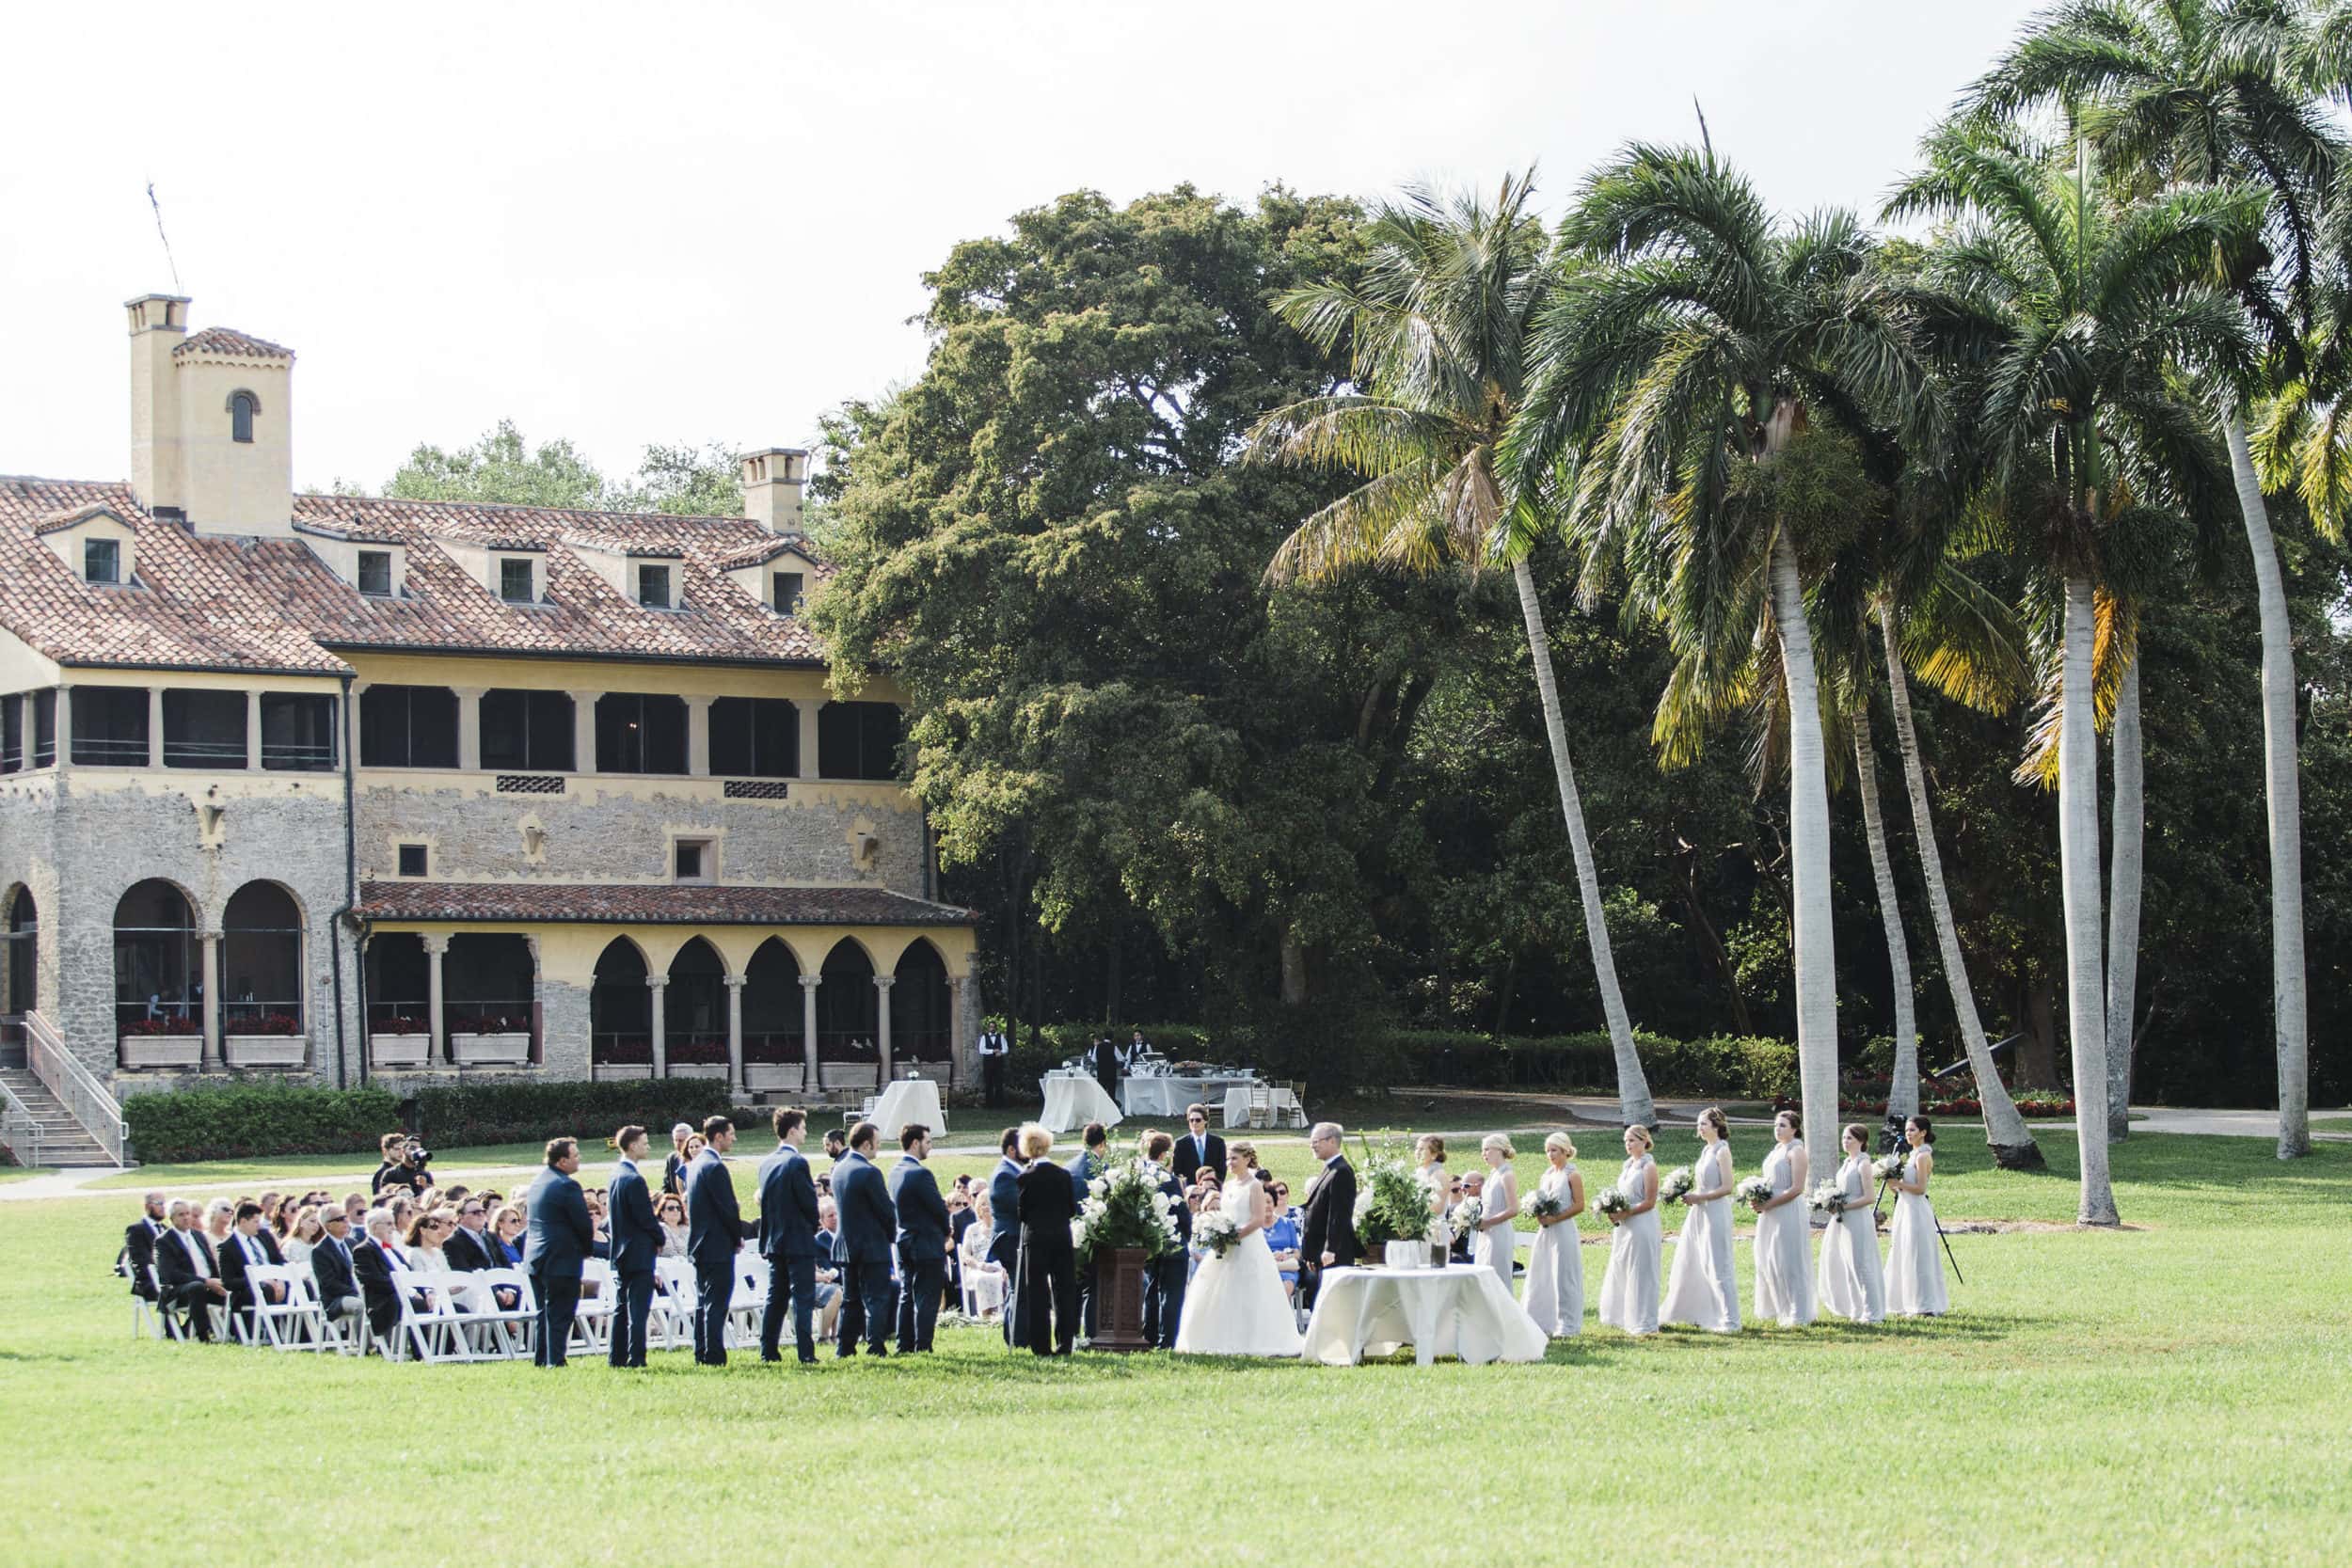 front lawn ceremony space with building and palm trees in background at deering estate wedding